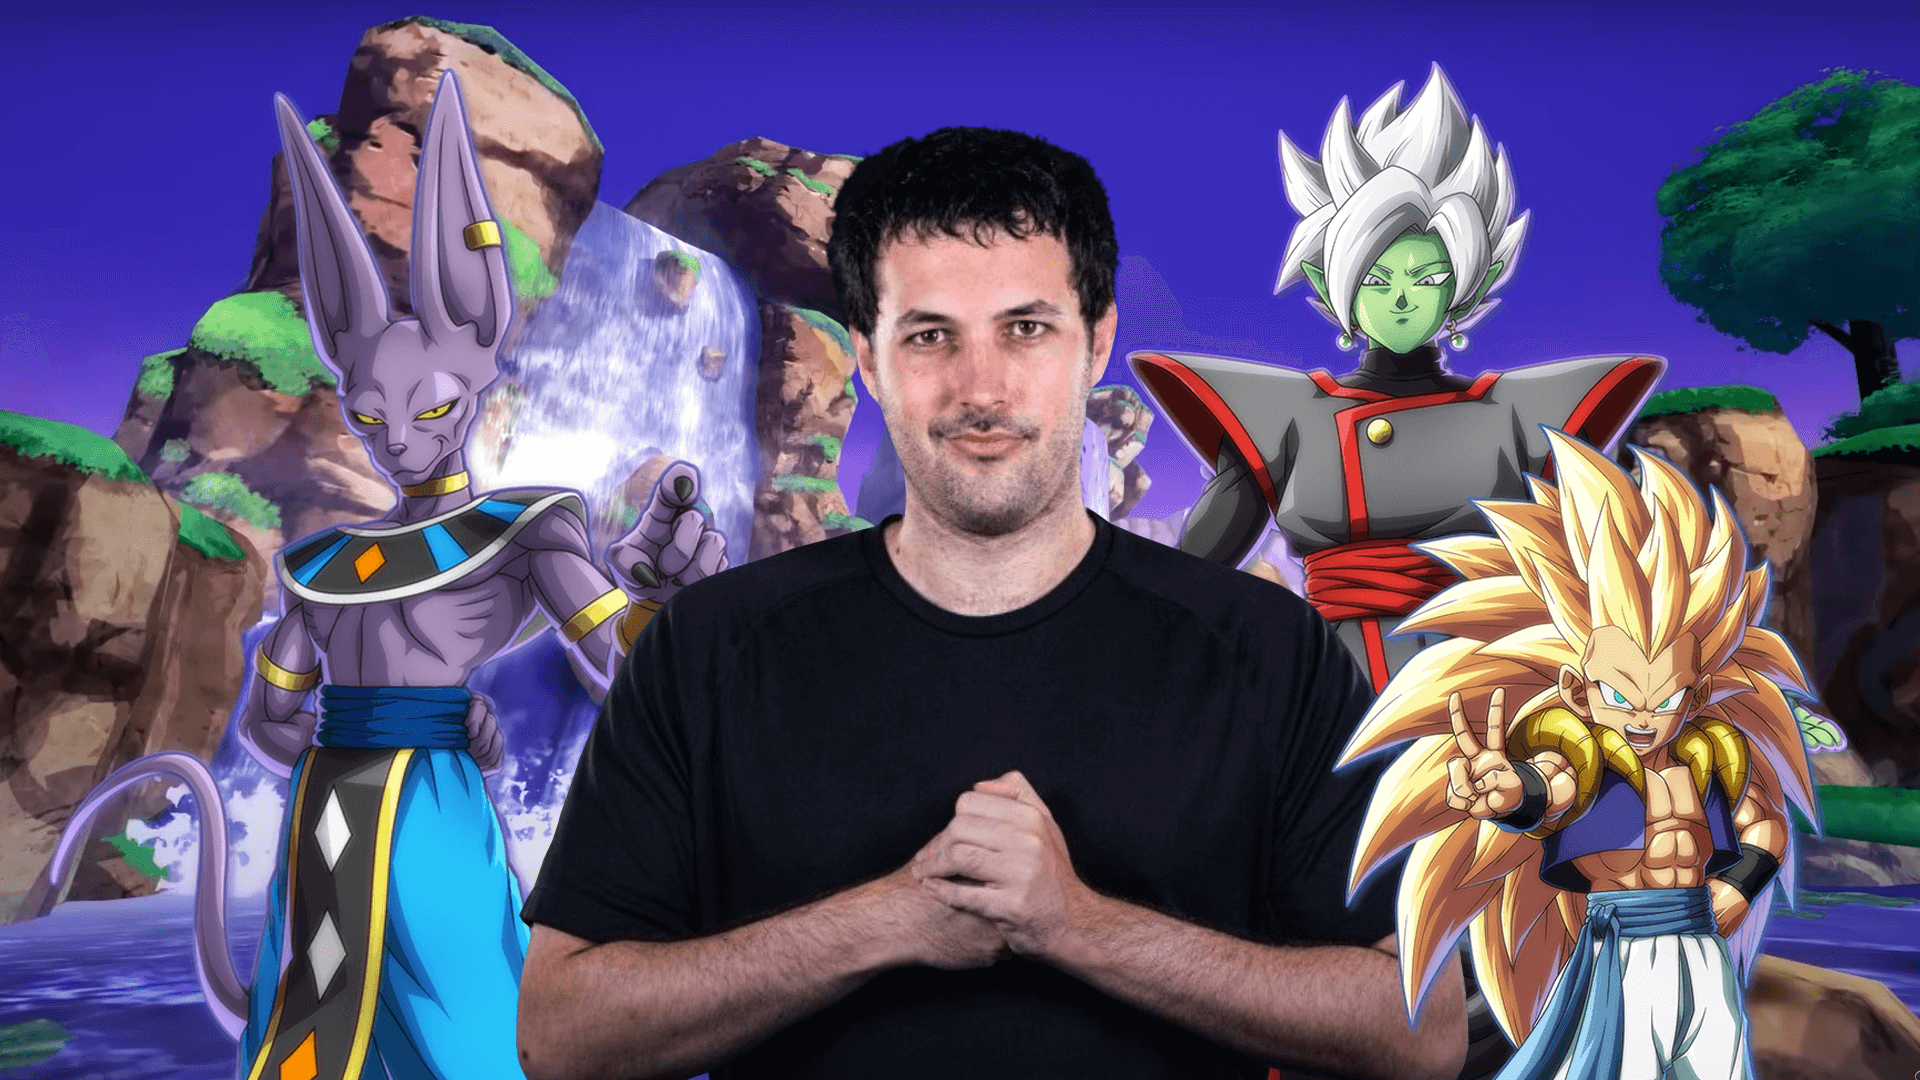 Zane: “Zamasu is still strong and will have a place on my team”